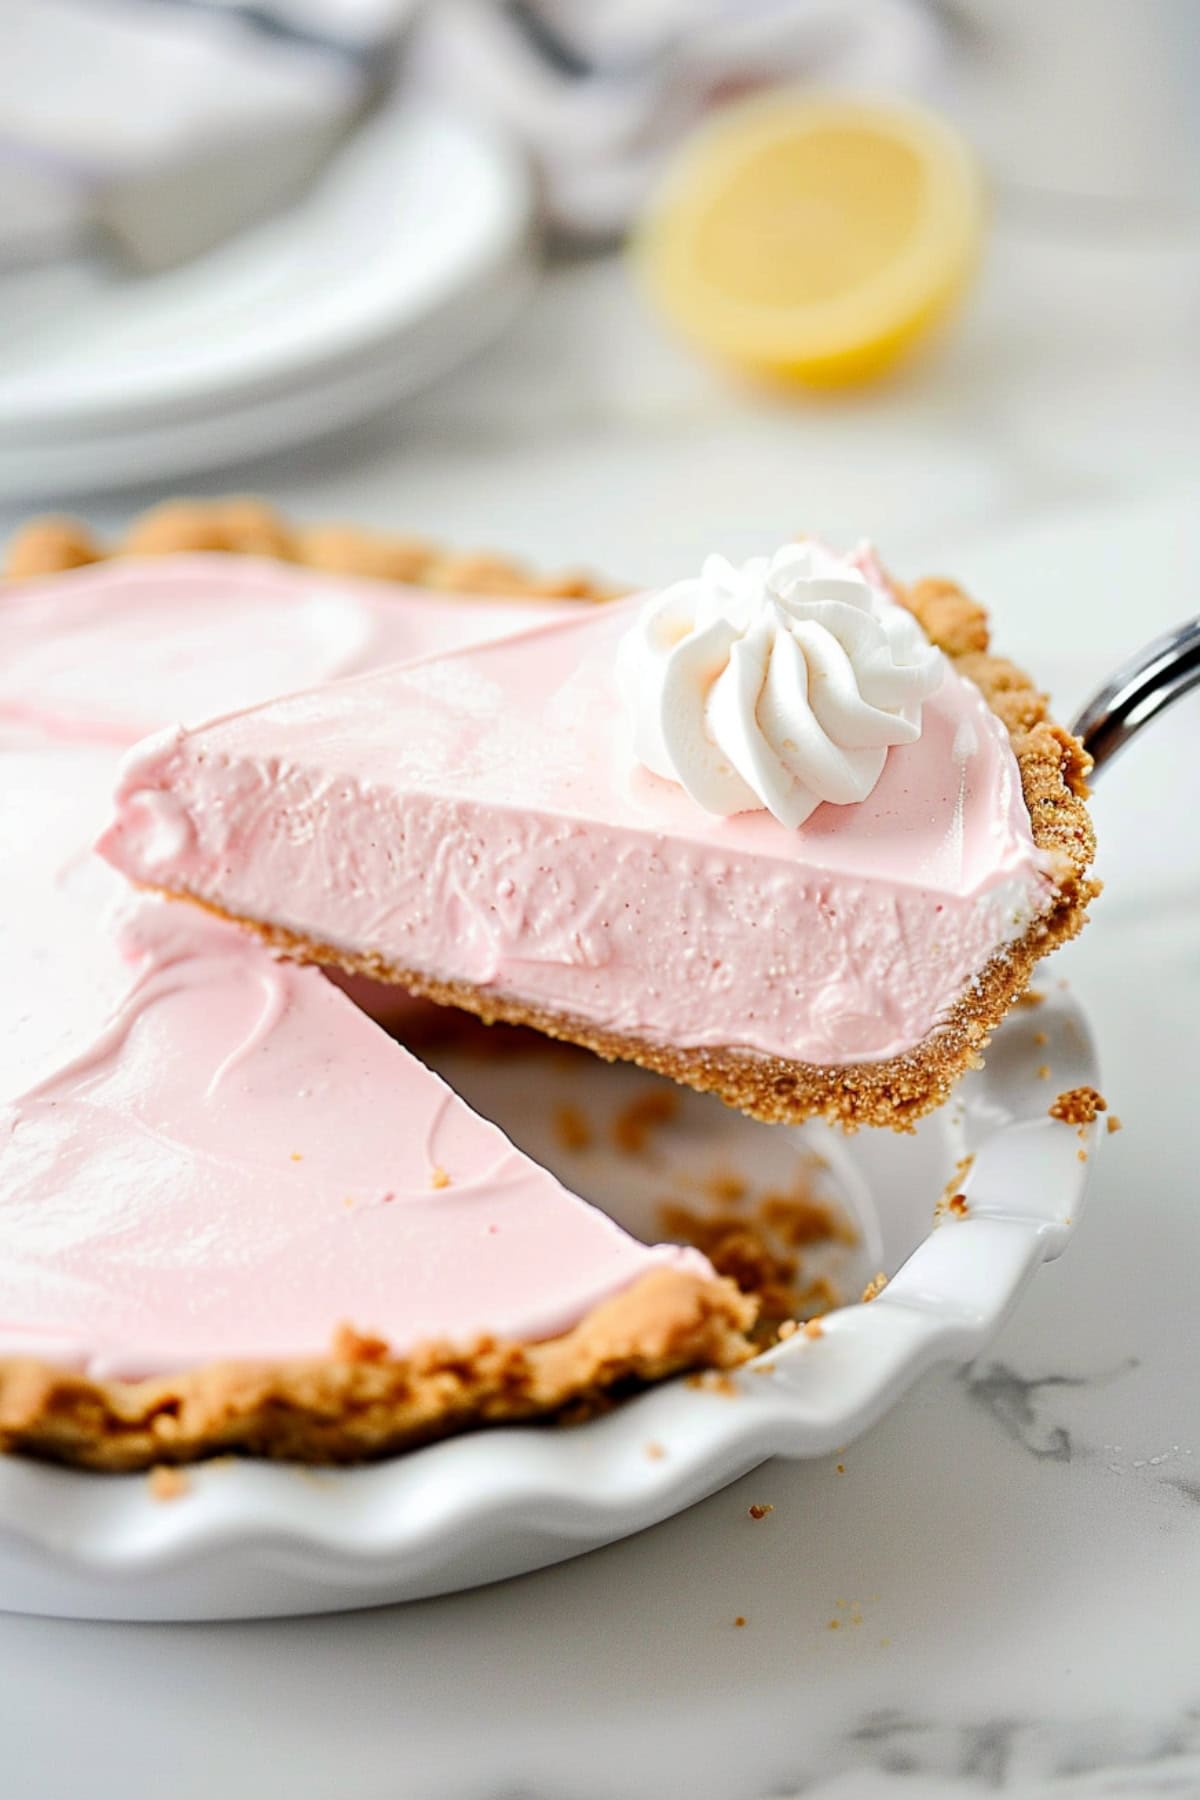 Pie ladle lifting a slice of pink lemonade piece with whipped cream on top.